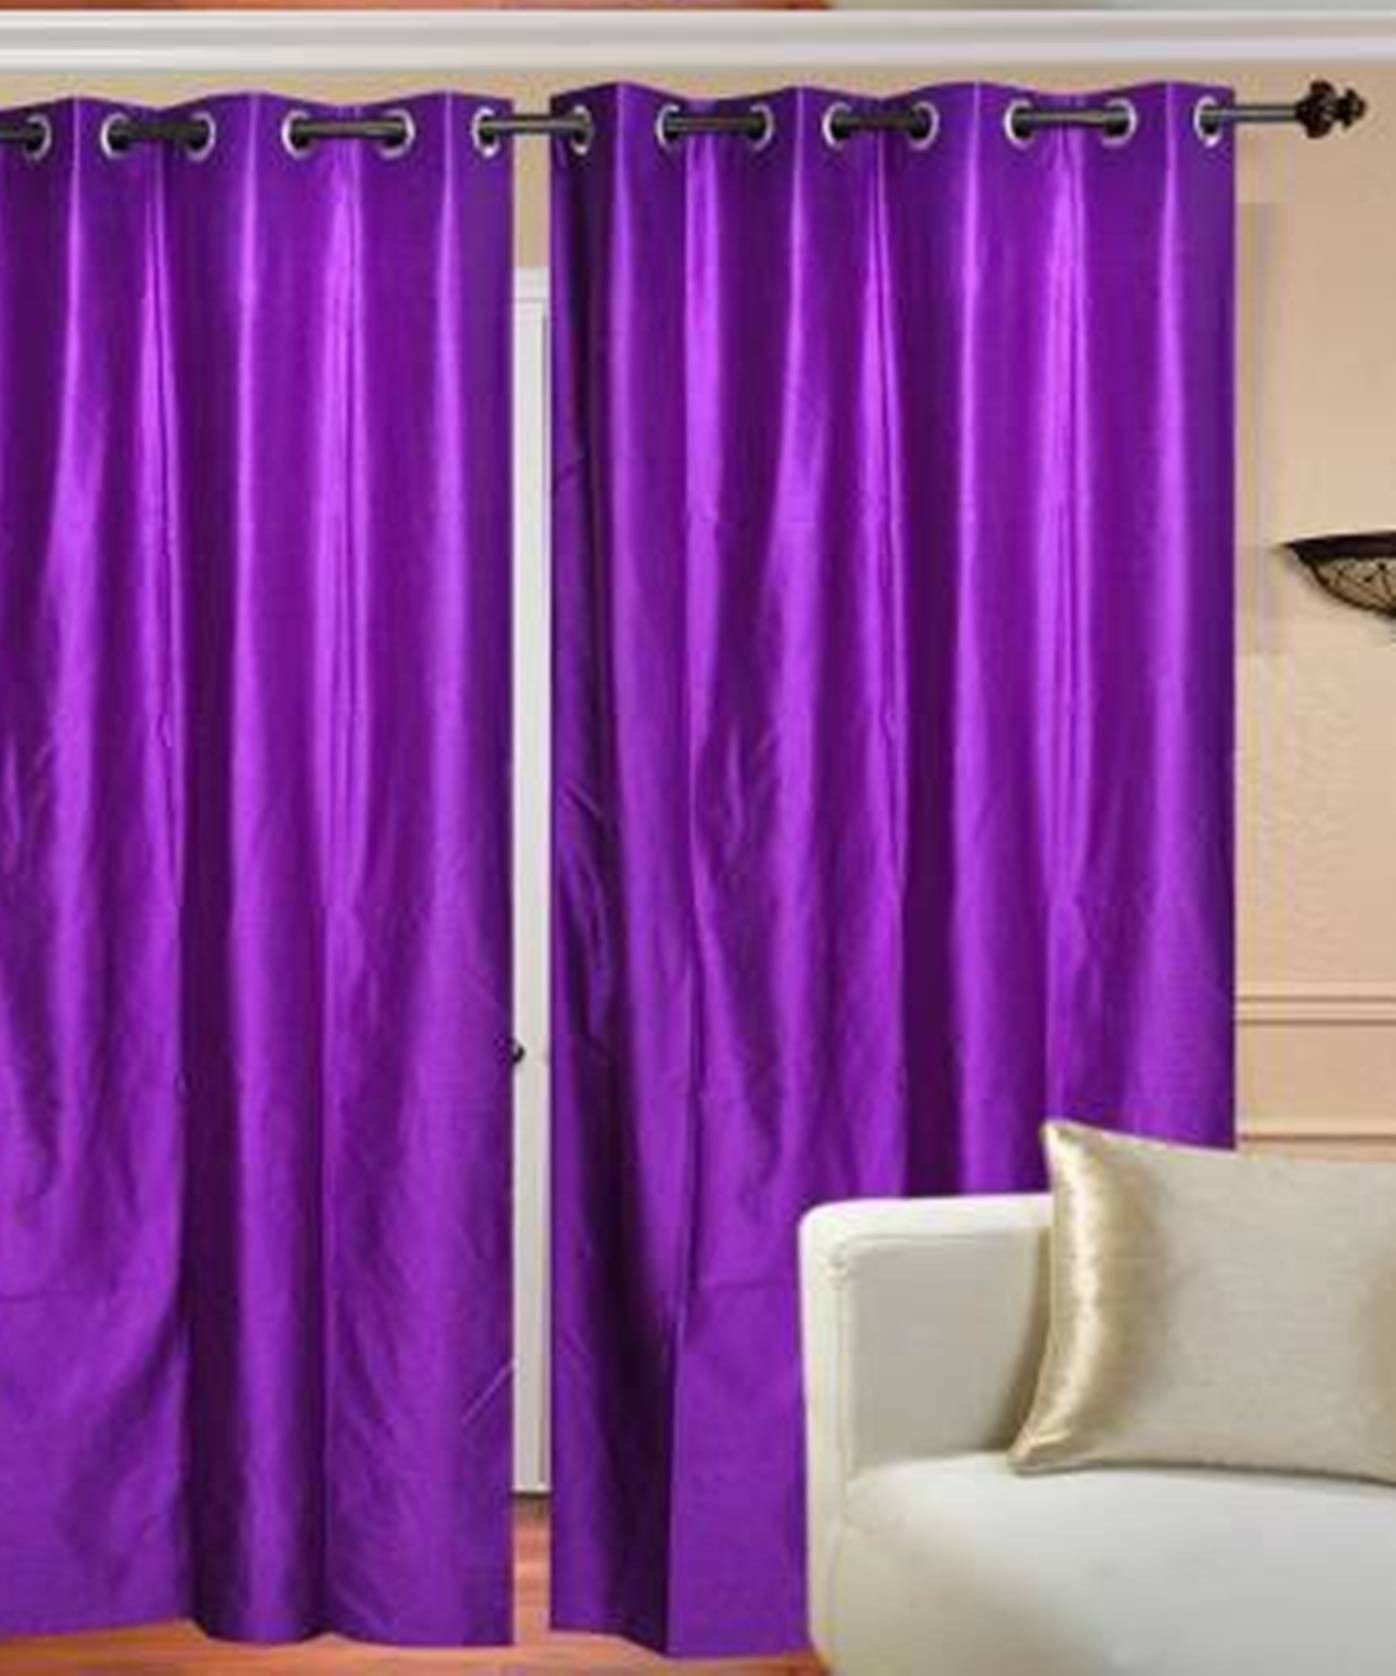     			N2C Home Solid Semi-Transparent Rod pocket Curtain 7 ft ( Pack of 2 ) - Purple